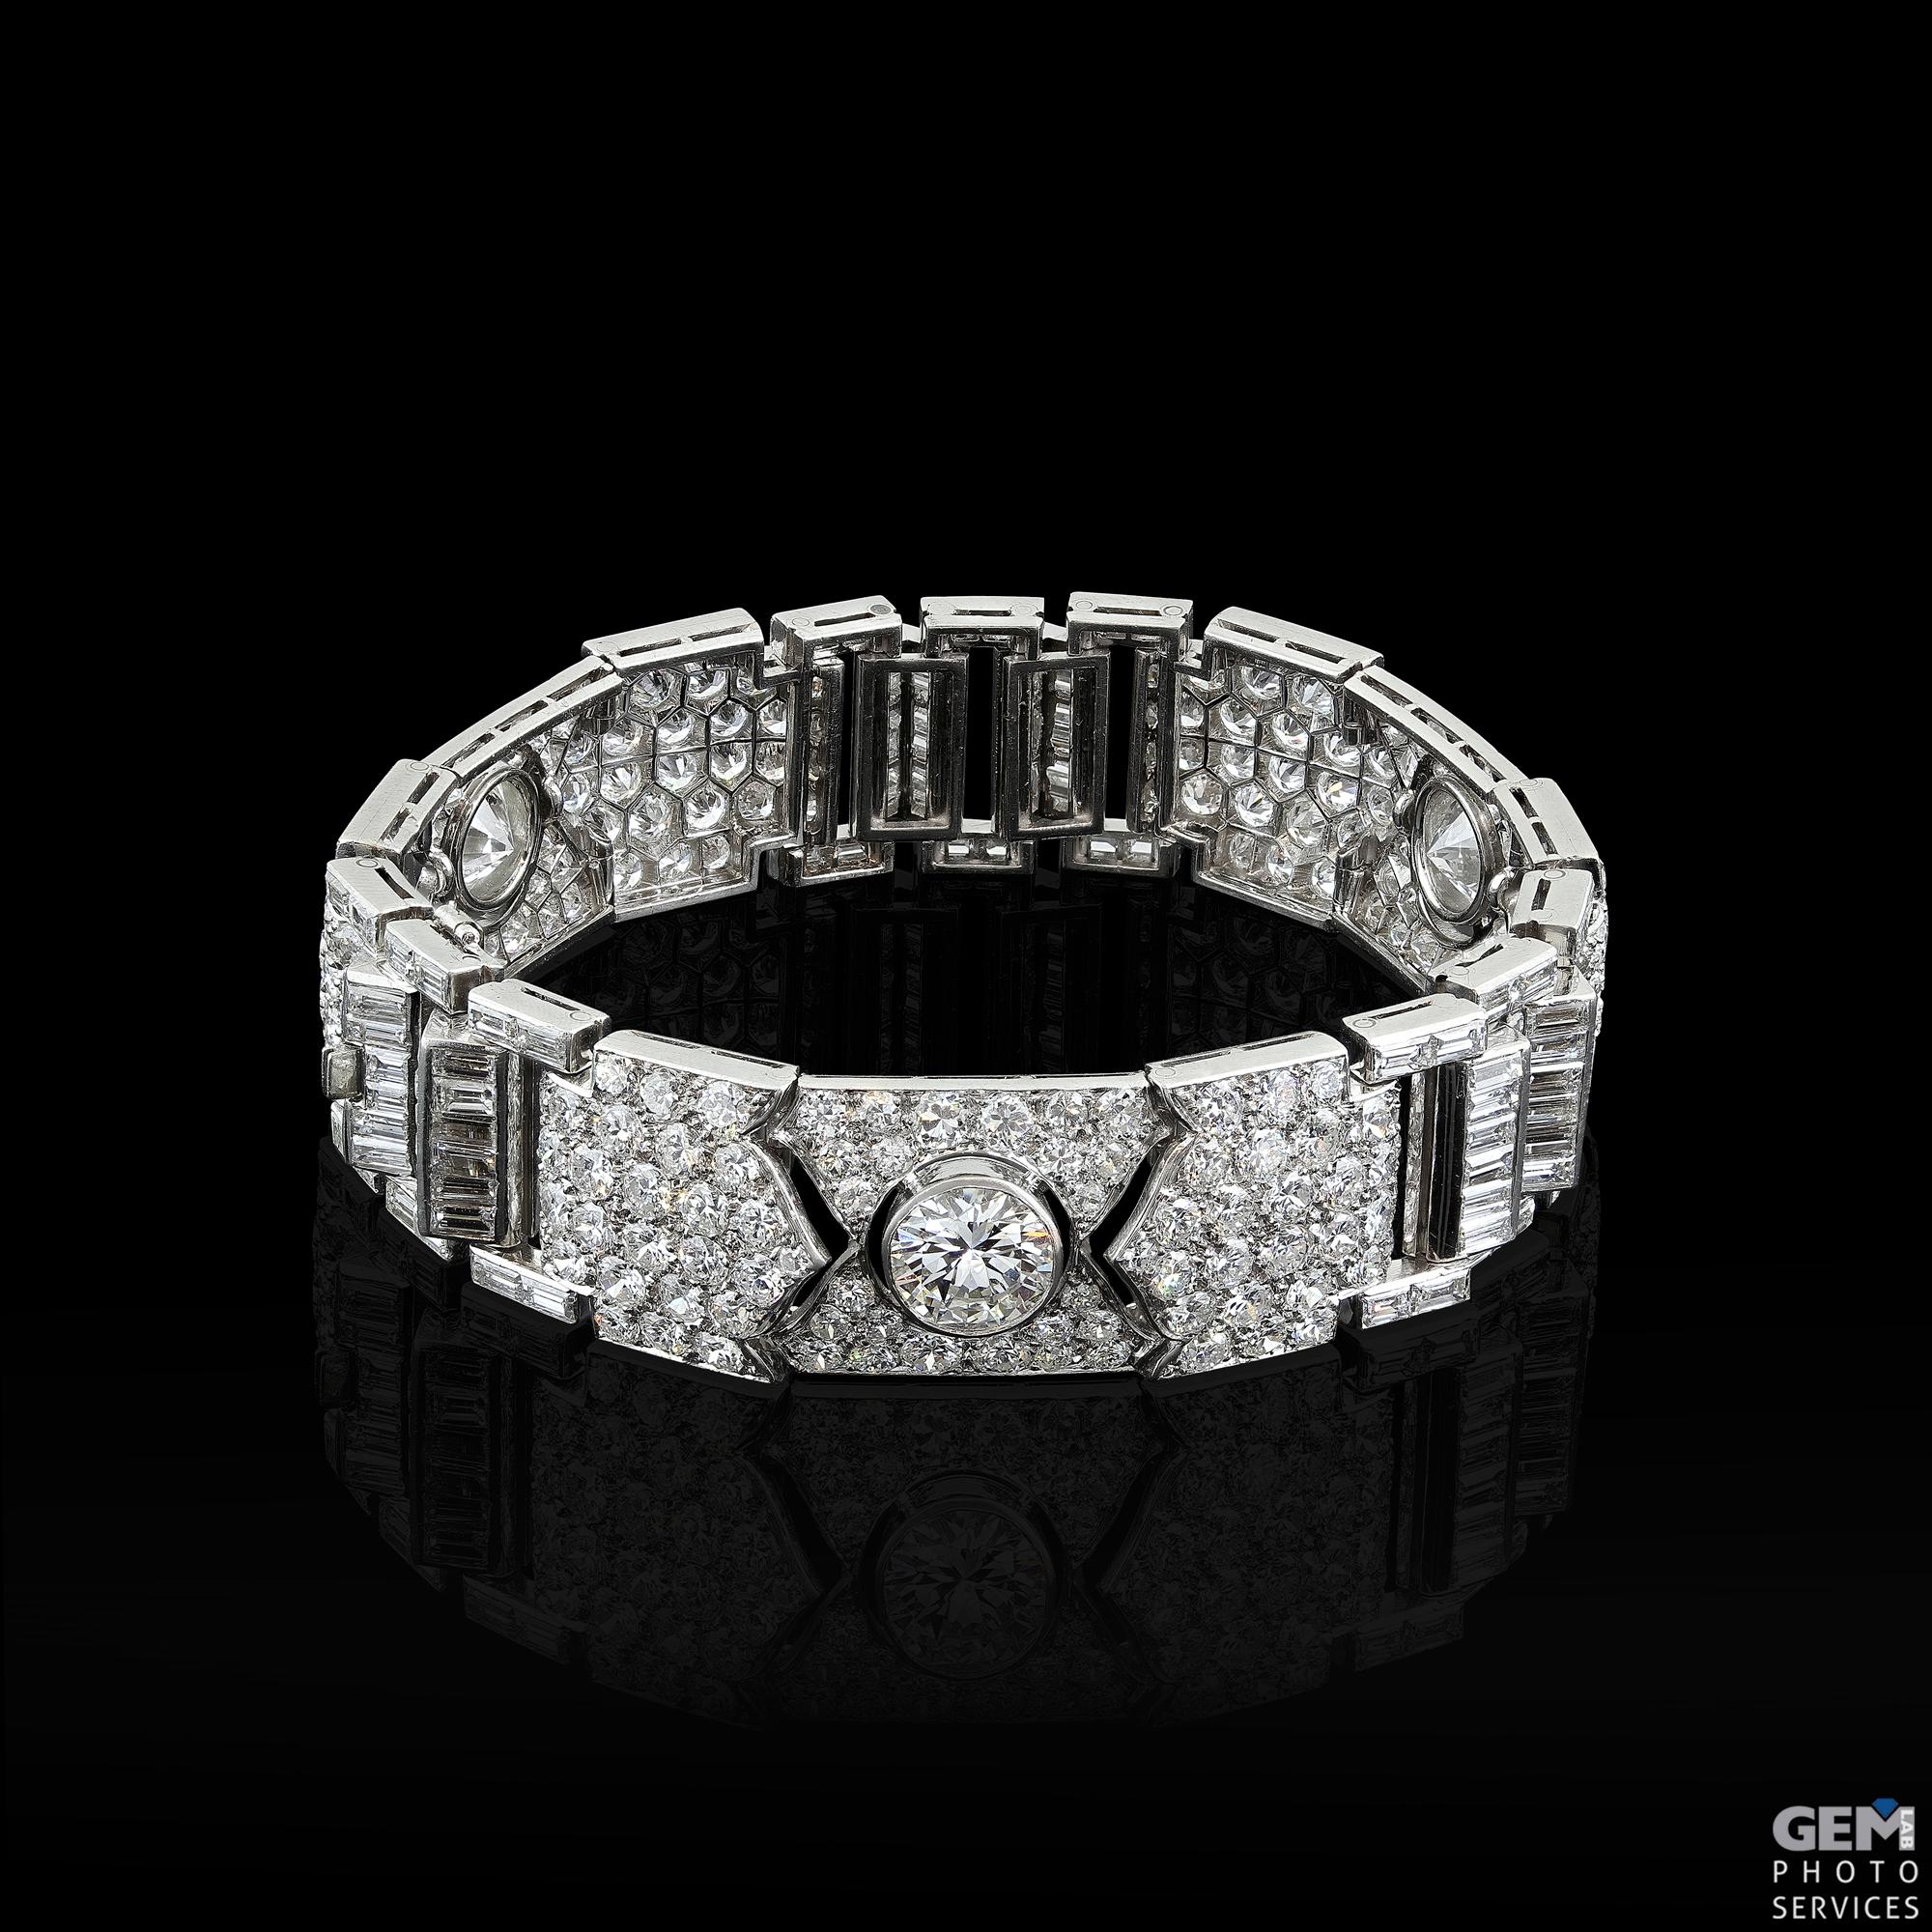 Unique Art deco Platinum bracelet with top quality diamonds signed L C

There are not enough  words to describe this handmade crafted elegant bracelet back in the 1920's.

We presume this bracelet is LACLOCHE as it has a LC stamp on the bracelet and